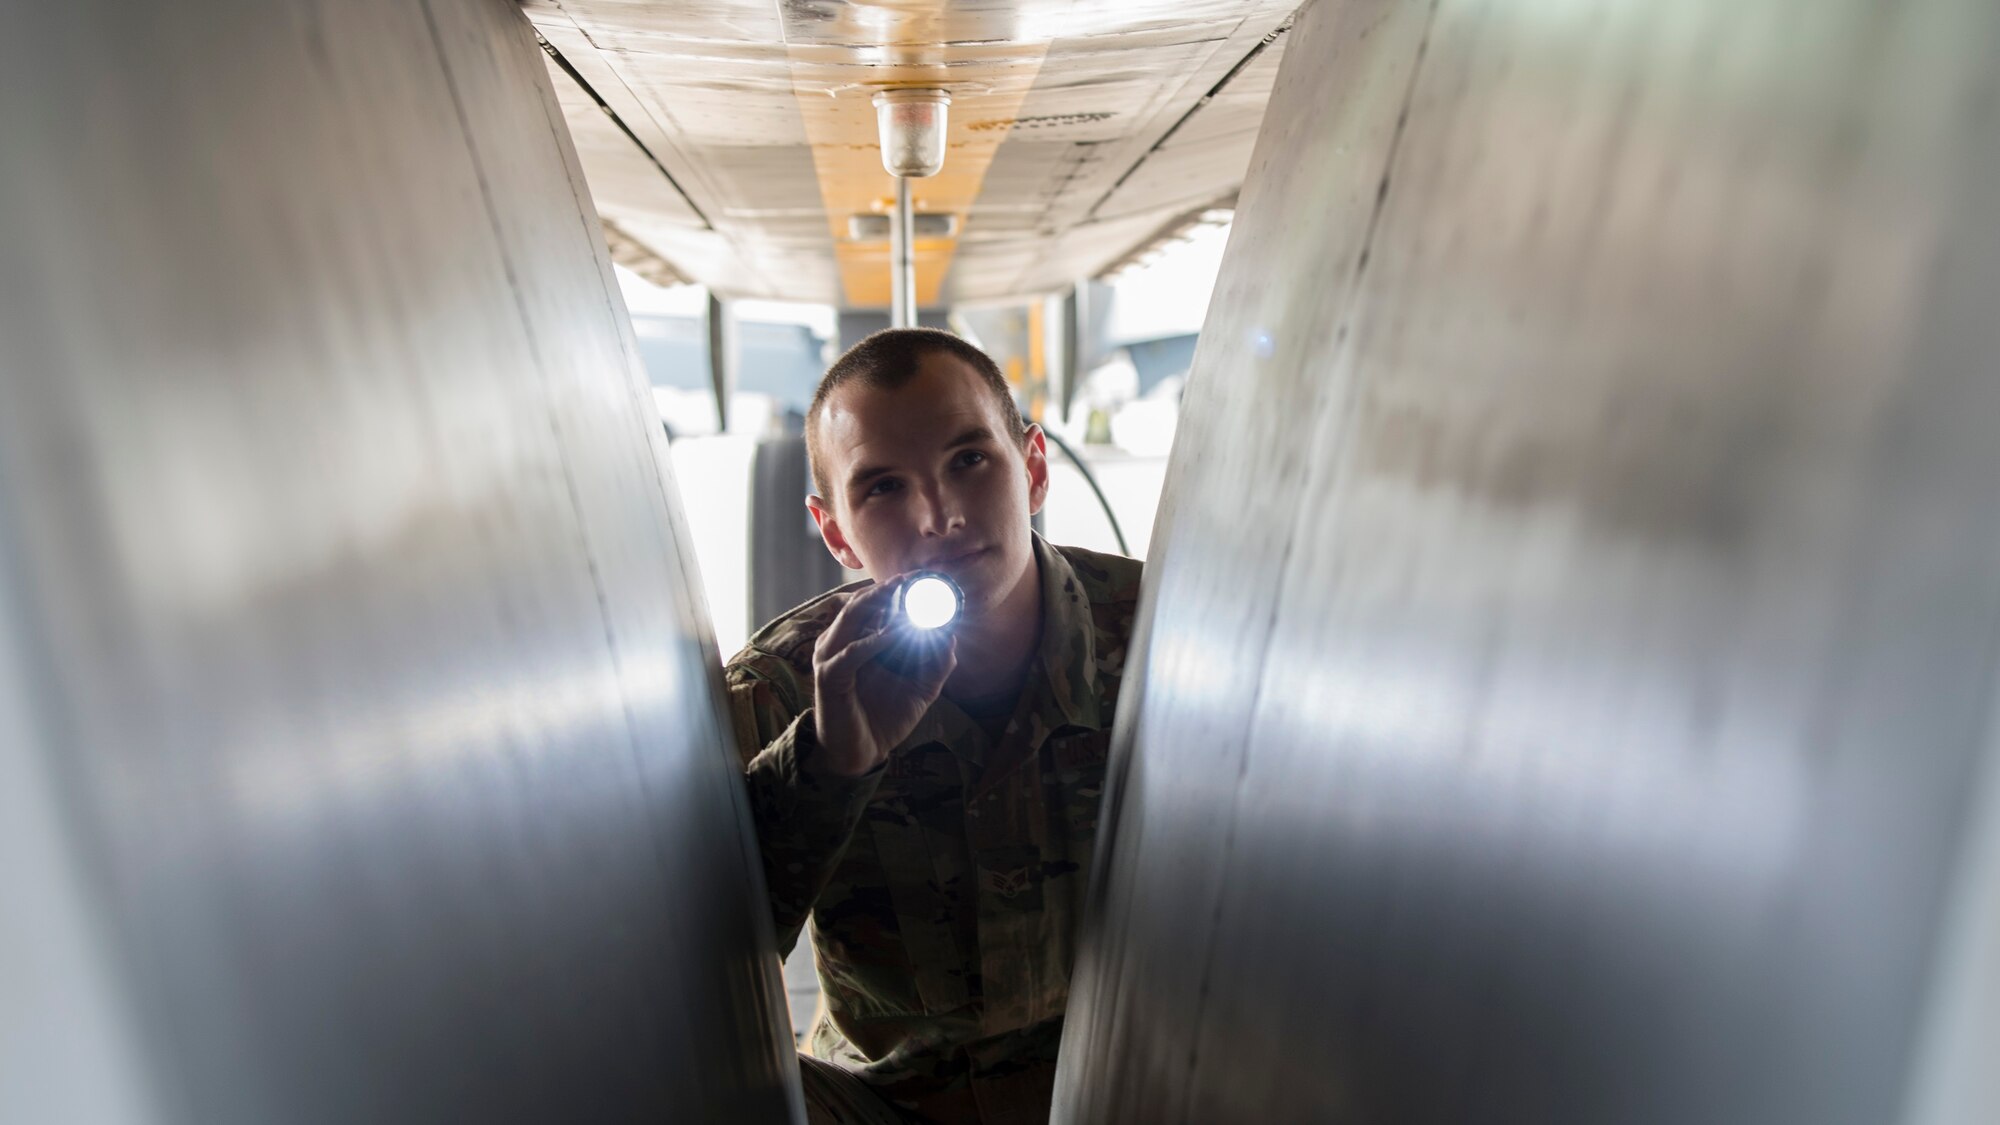 U.S. Air Force Senior Airman Clayton Collier, a 6th Aircraft Maintenance Squadron (AMXS) crew chief, inspects landing gear systems, on a KC-135 Stratotanker, Jan. 23, 2020, at MacDill Air Force Base, Fla. In 2019, the 6th AMXS supported over 5,000 flight hours and 965 sorties.